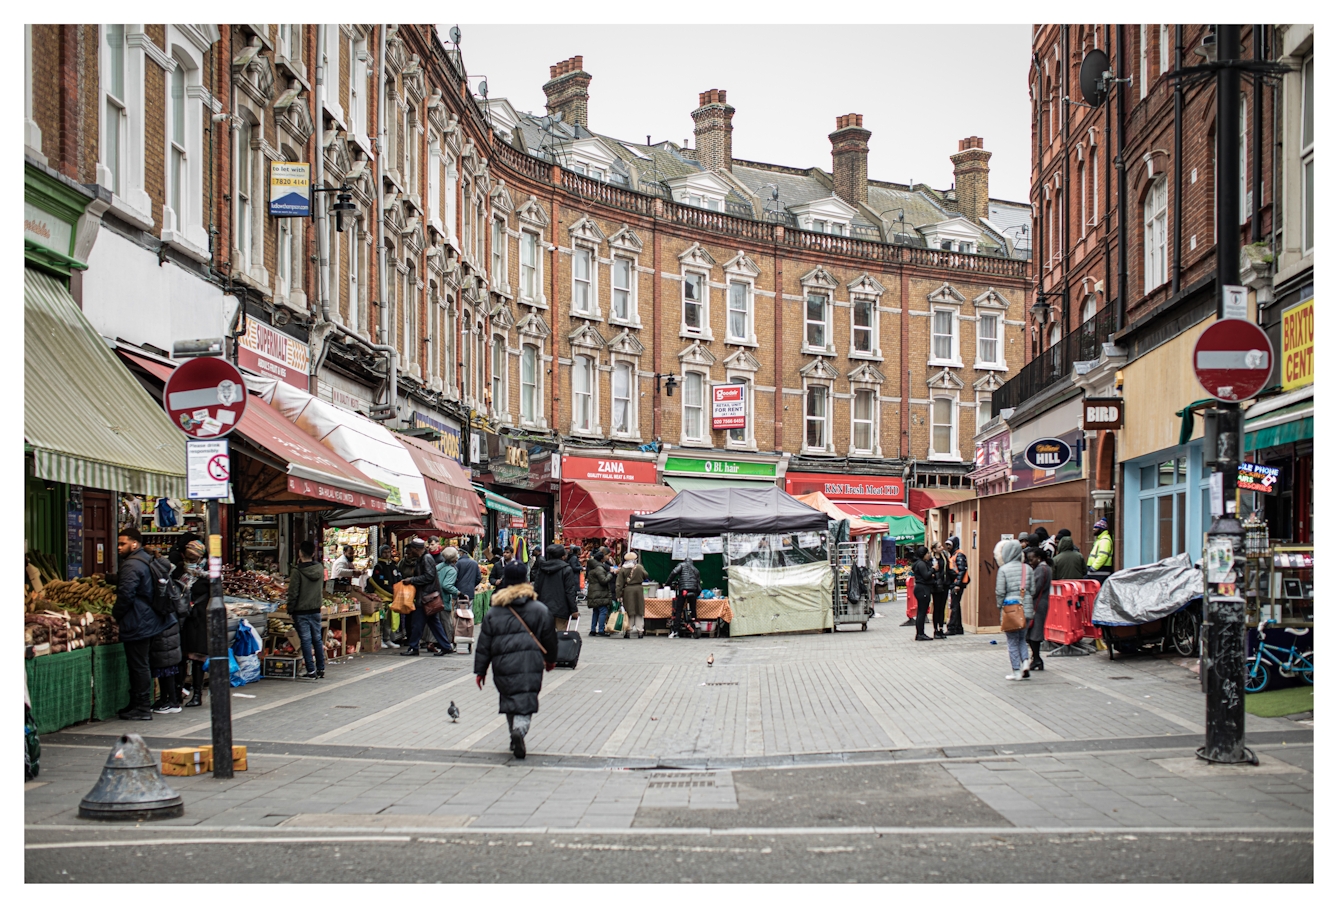 Photograph of a South London street scene in Brixton, showing a pedestrian road with market stalls set up in the middle. The street is flanked by tall victorian red brick buildings. The ground floors are all shops, some with awnings lowered. People are milling about around the market stalls, carrying bags. In the foreground to the left and right are two posts with circular red and white no entry road signs.